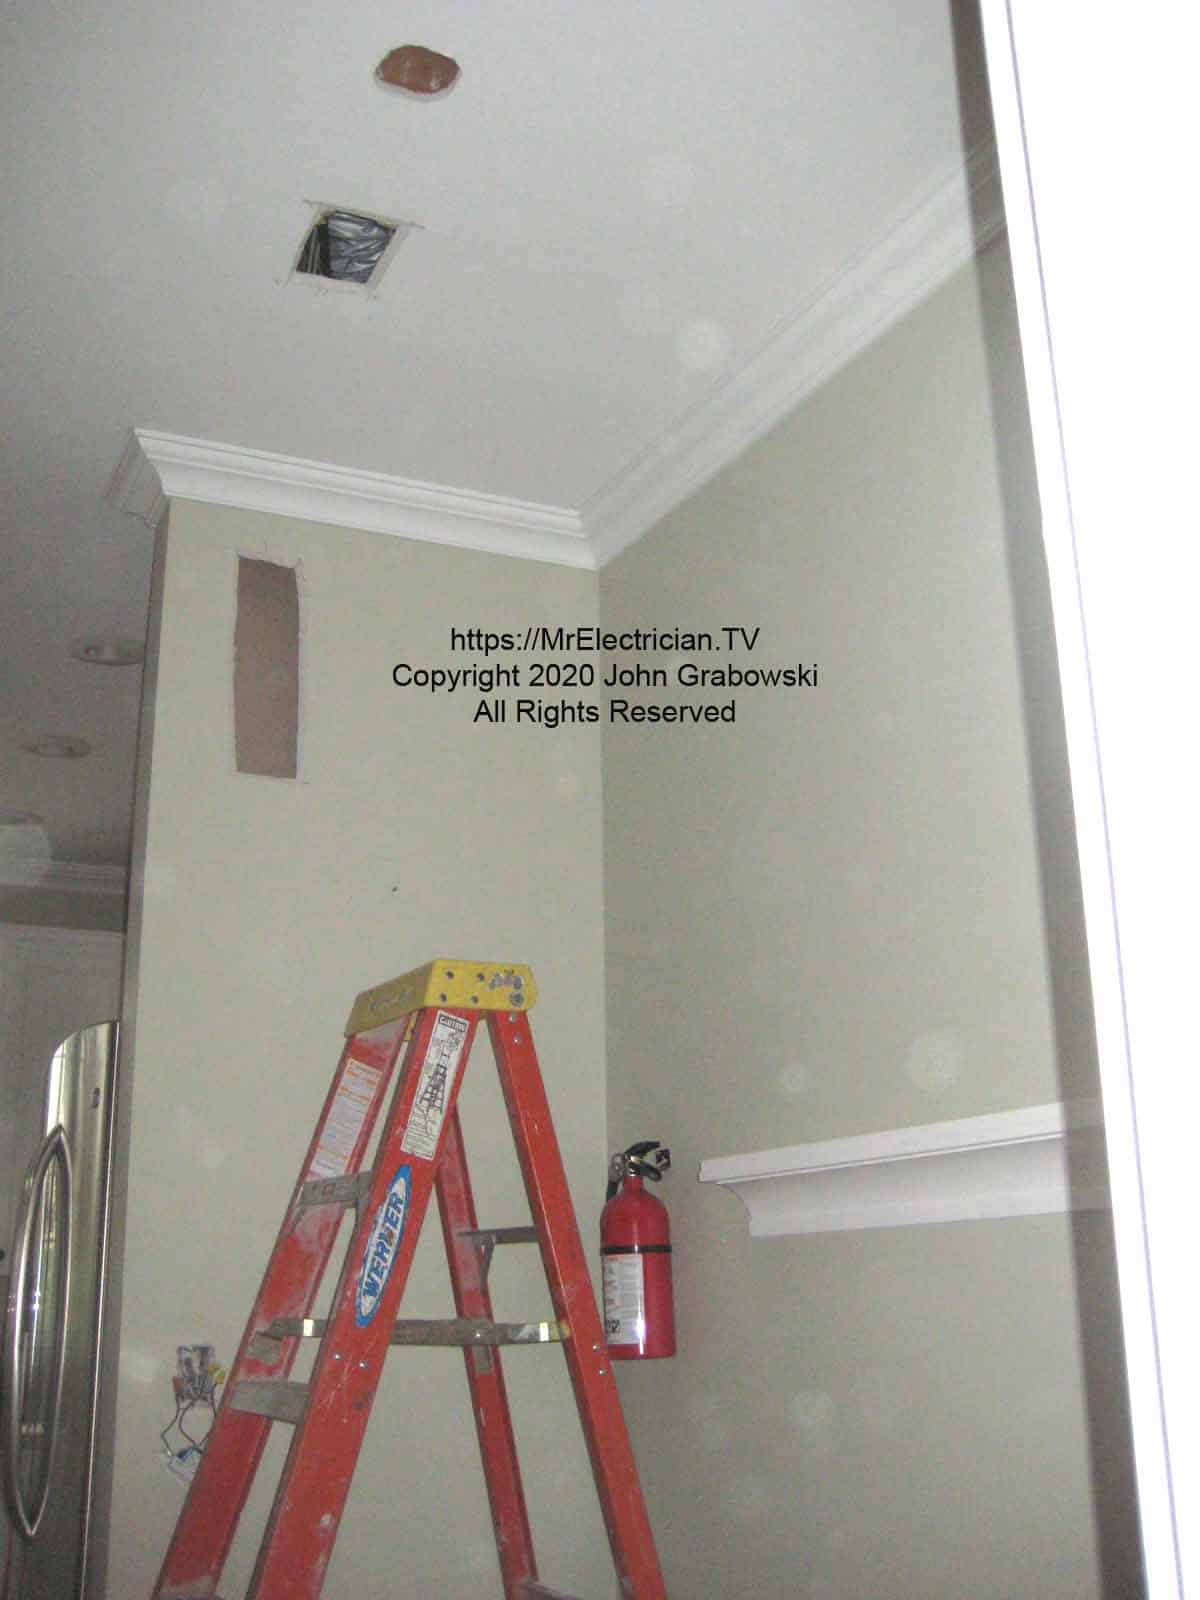 The access holes in the wall and the ceiling to facilitate the installation of a new wire to feed the new light fixture